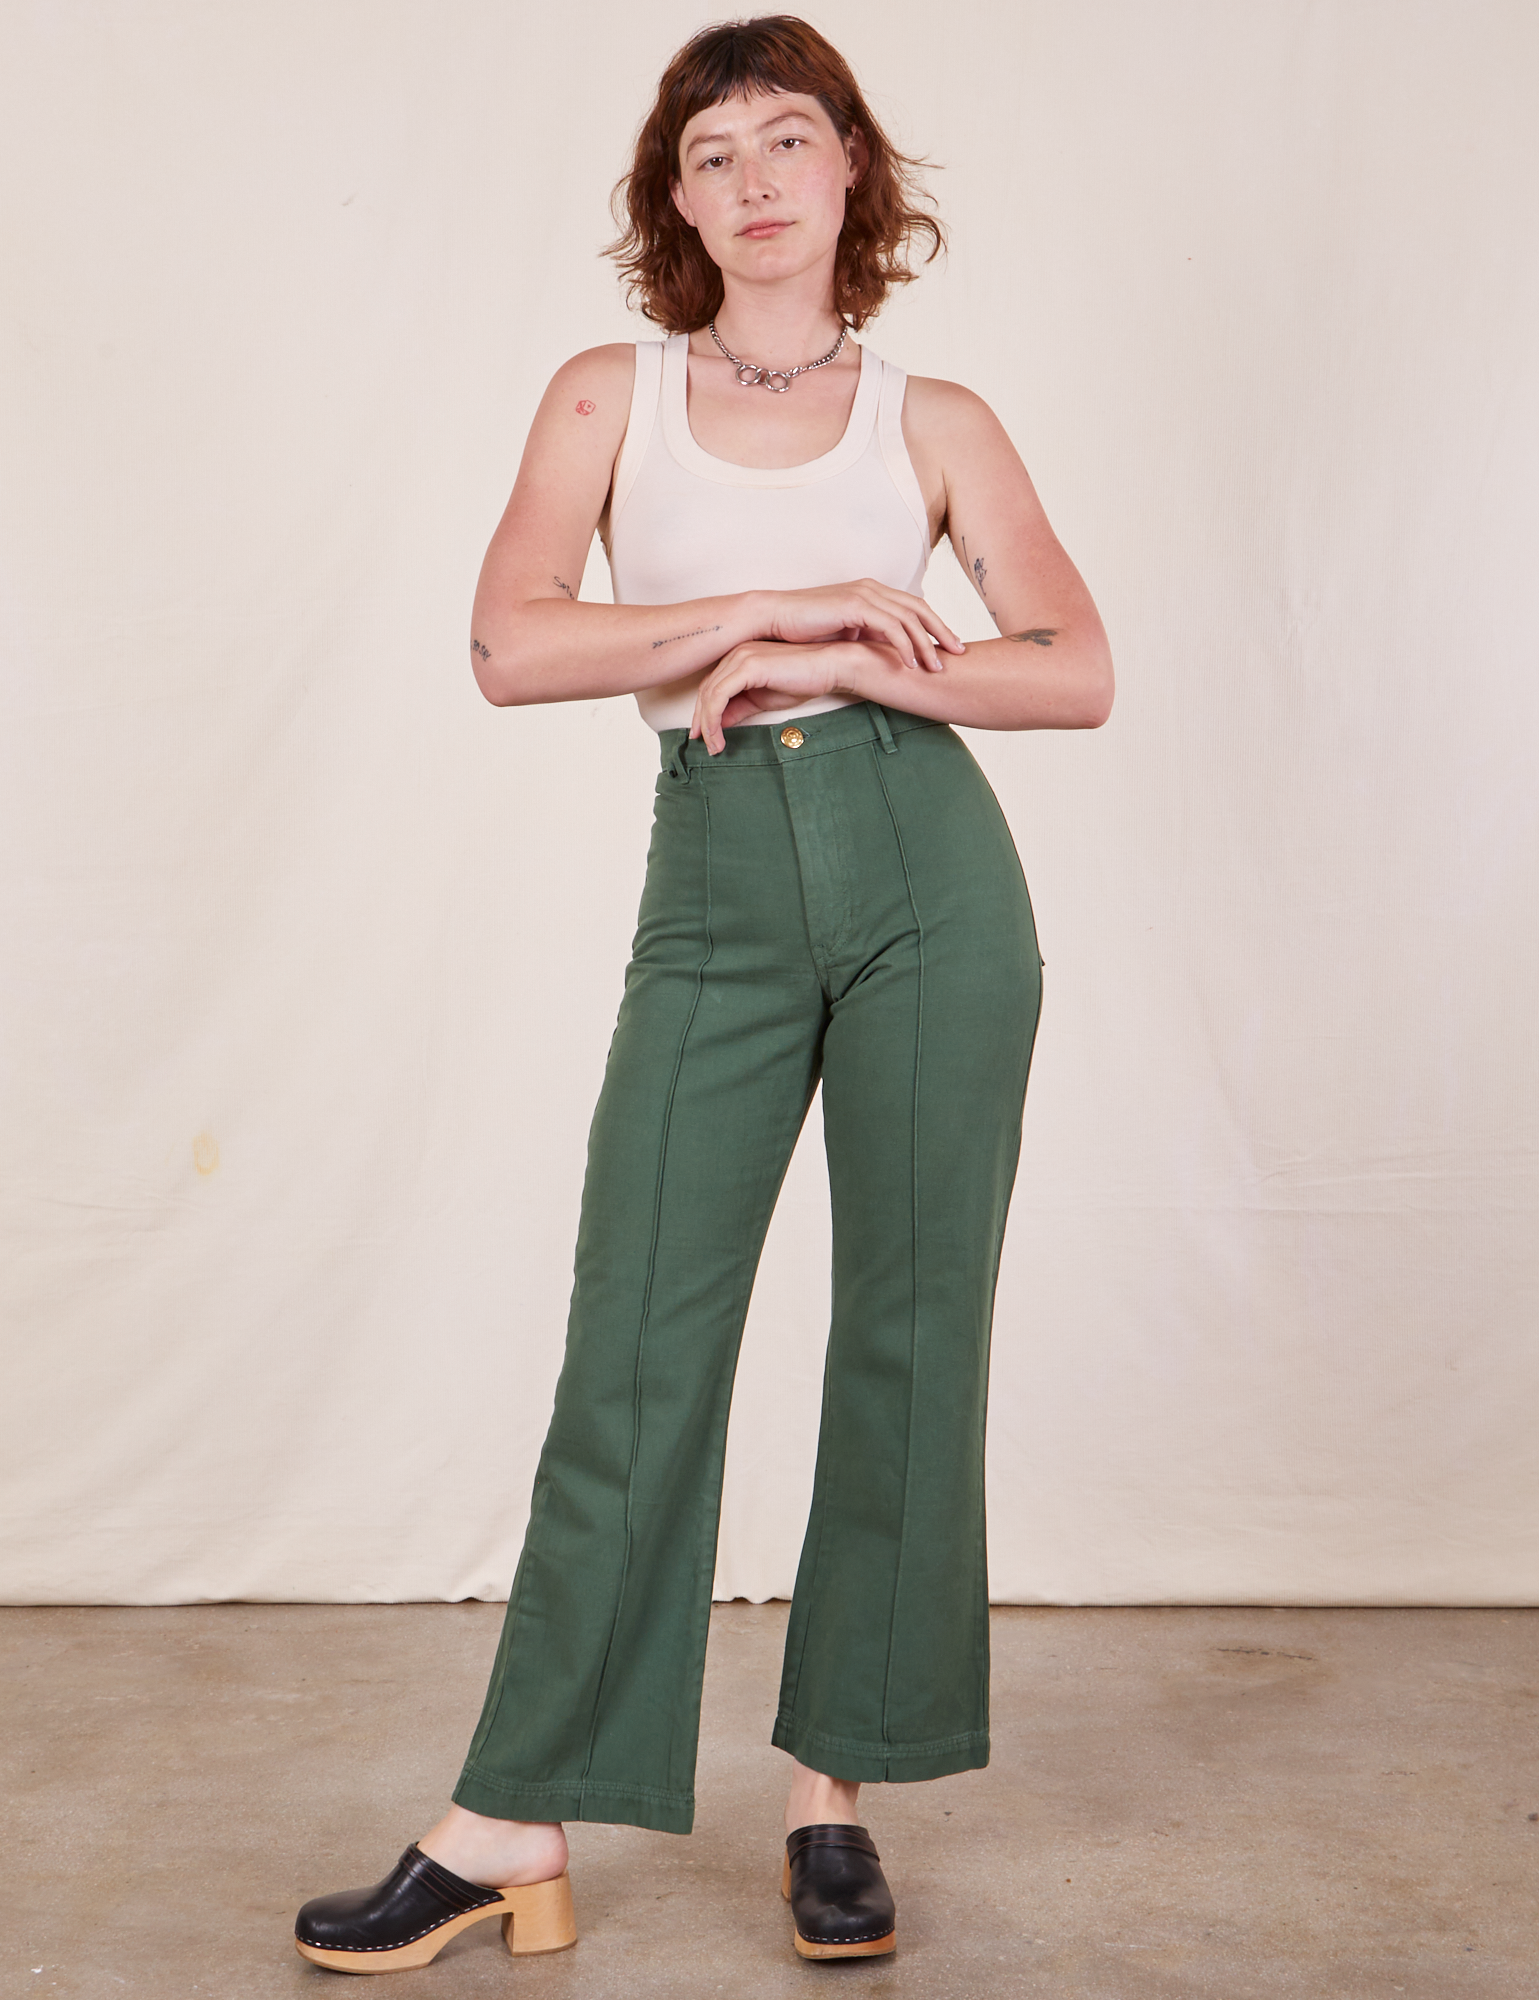 Alex is 5&#39;8&quot; and wearing XS Western Pants in Dark Green Emerald paired with a vintage off-white Tank Top